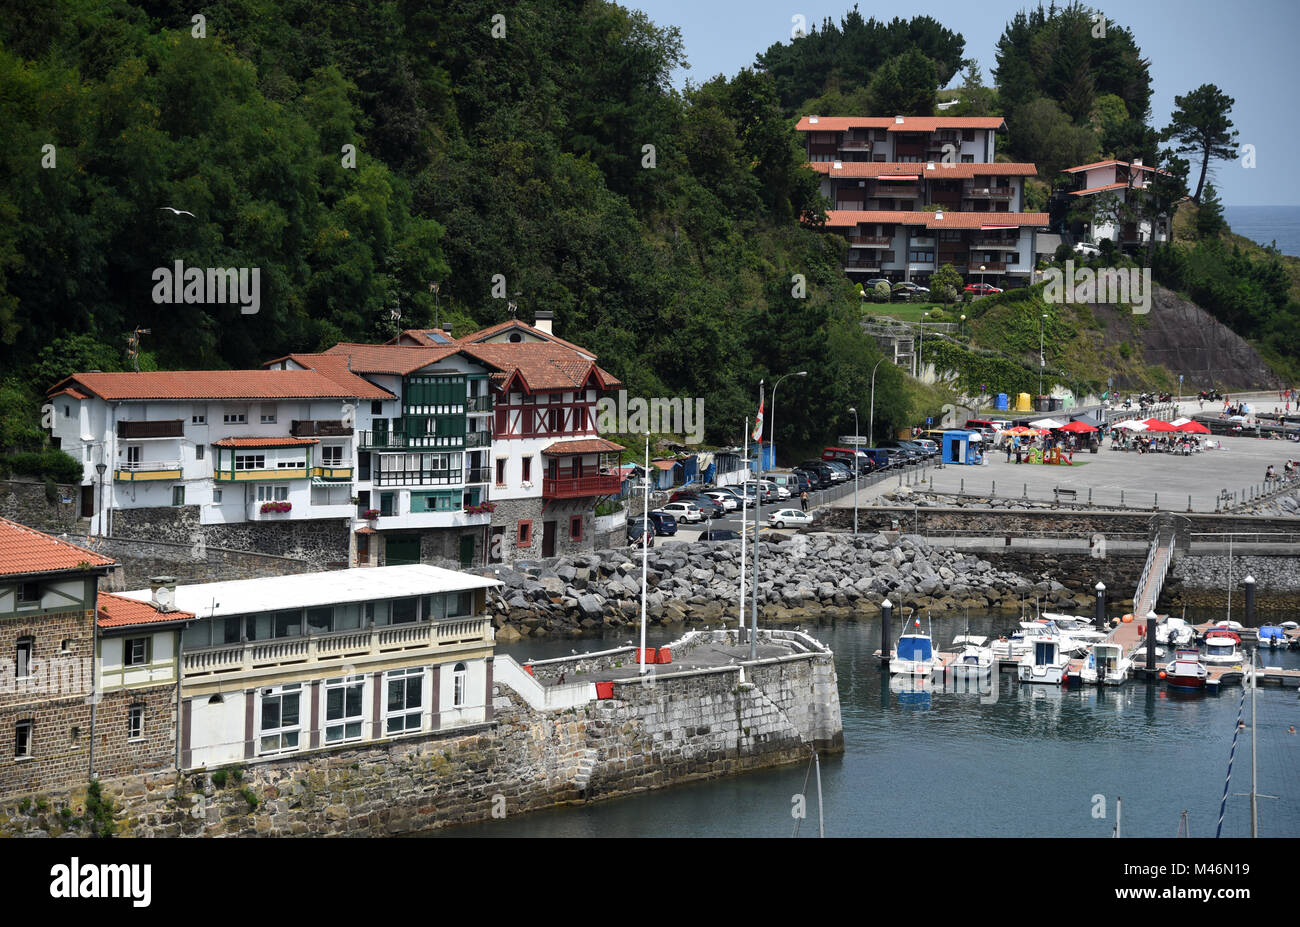 Mutriku harbour, Bay of Biscay, Basque country, Gipuzkoa province, Spain, Europe Stock Photo